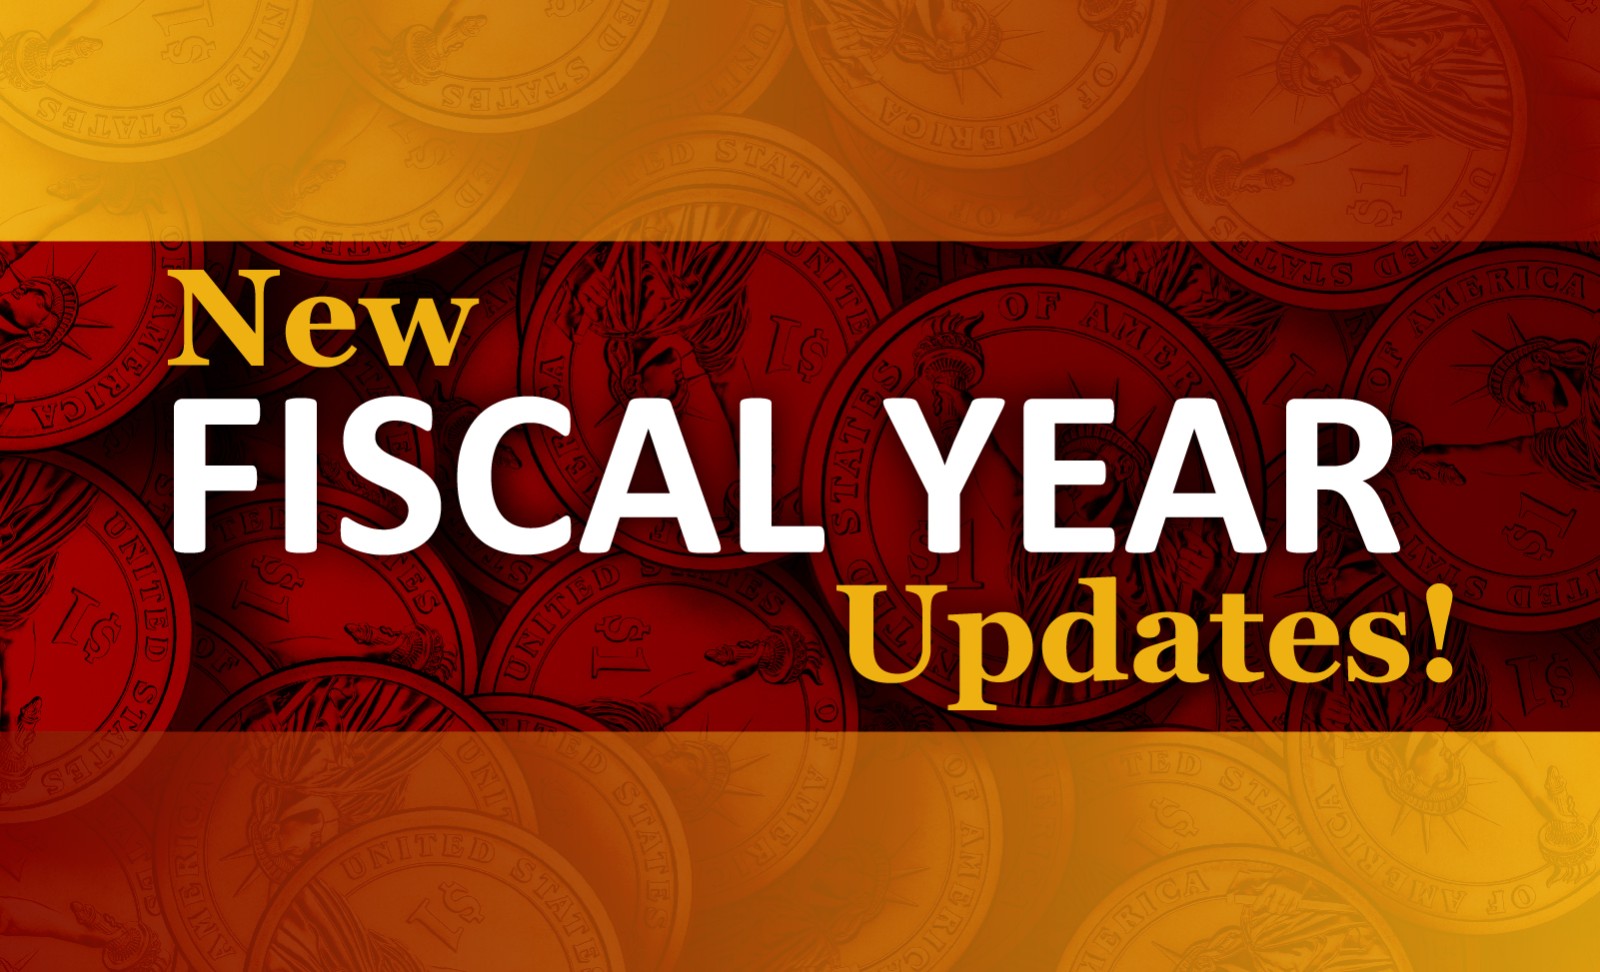 New Fiscal Year Updates!